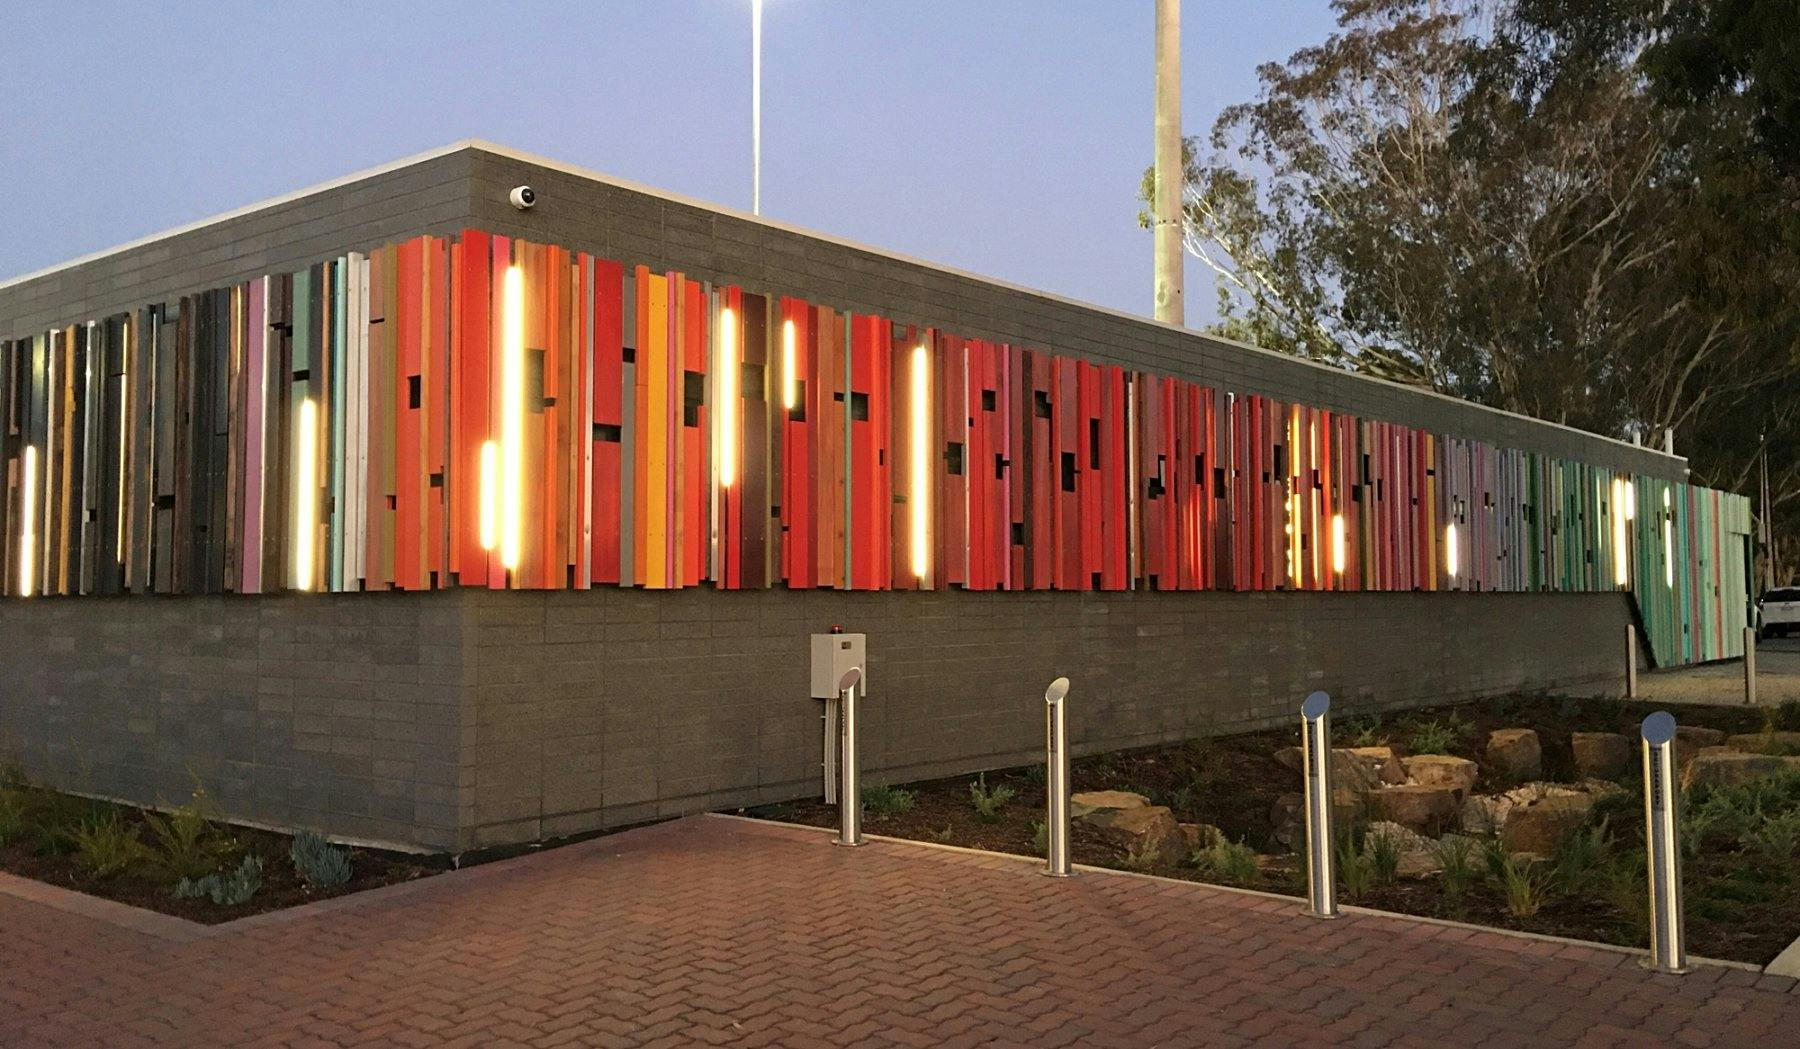 “e.v.a” 2020. Morphettville Sports and Community Centre by Michael Kutschbach. Image credit: Sam Noonan Photography. Commissioned by City of Marion